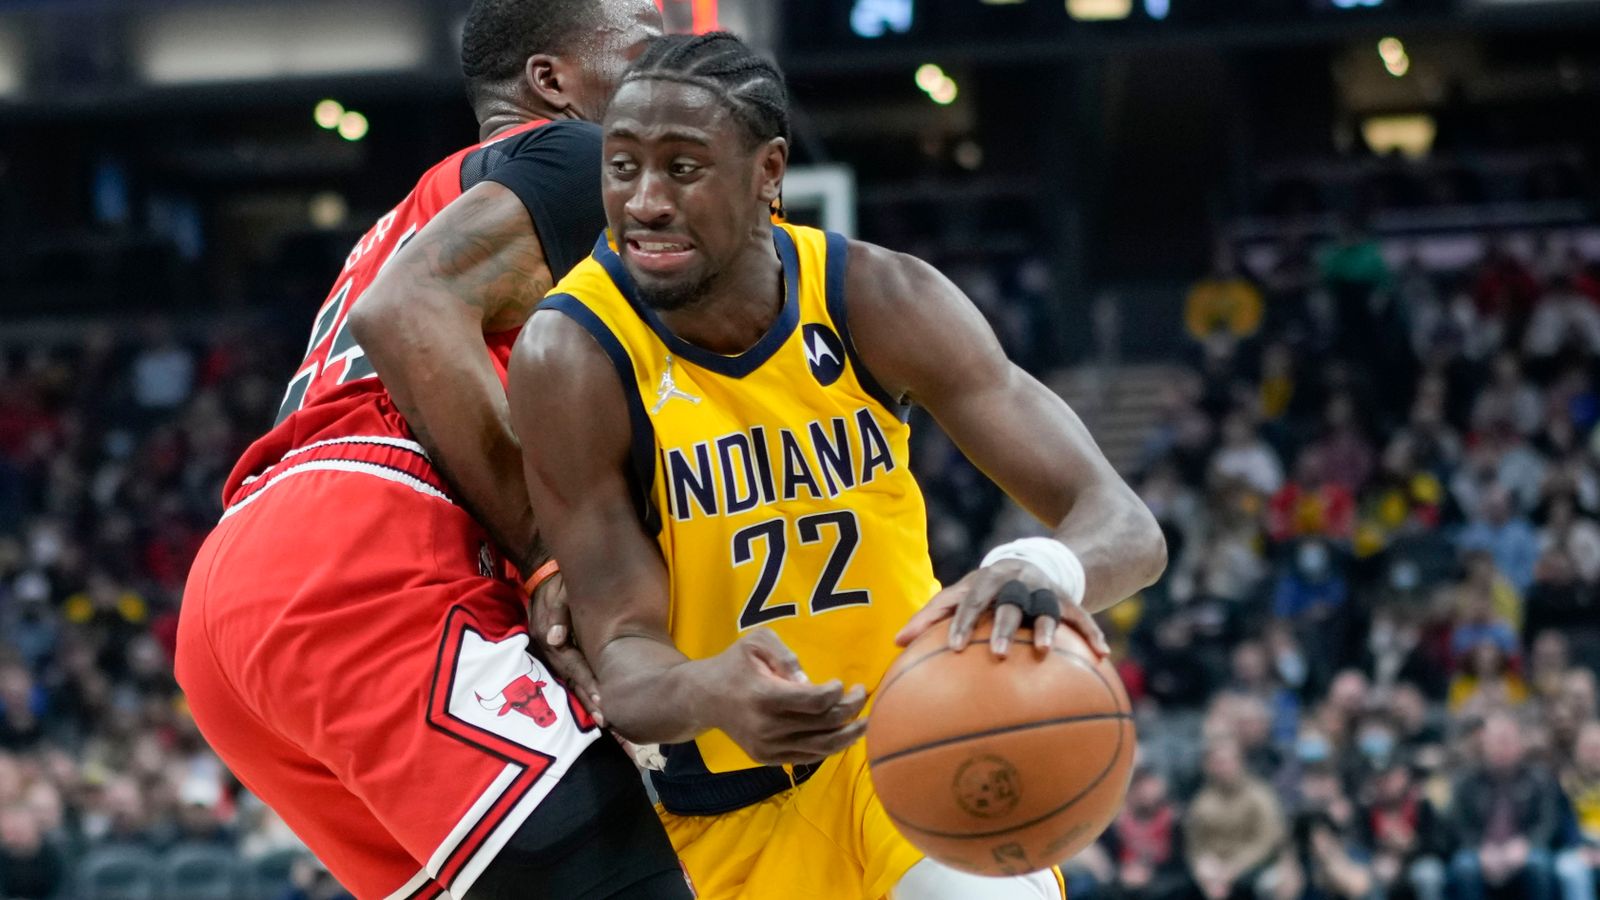 NBA Trade Deadline Caris LeVert joining Cleveland Cavaliers from